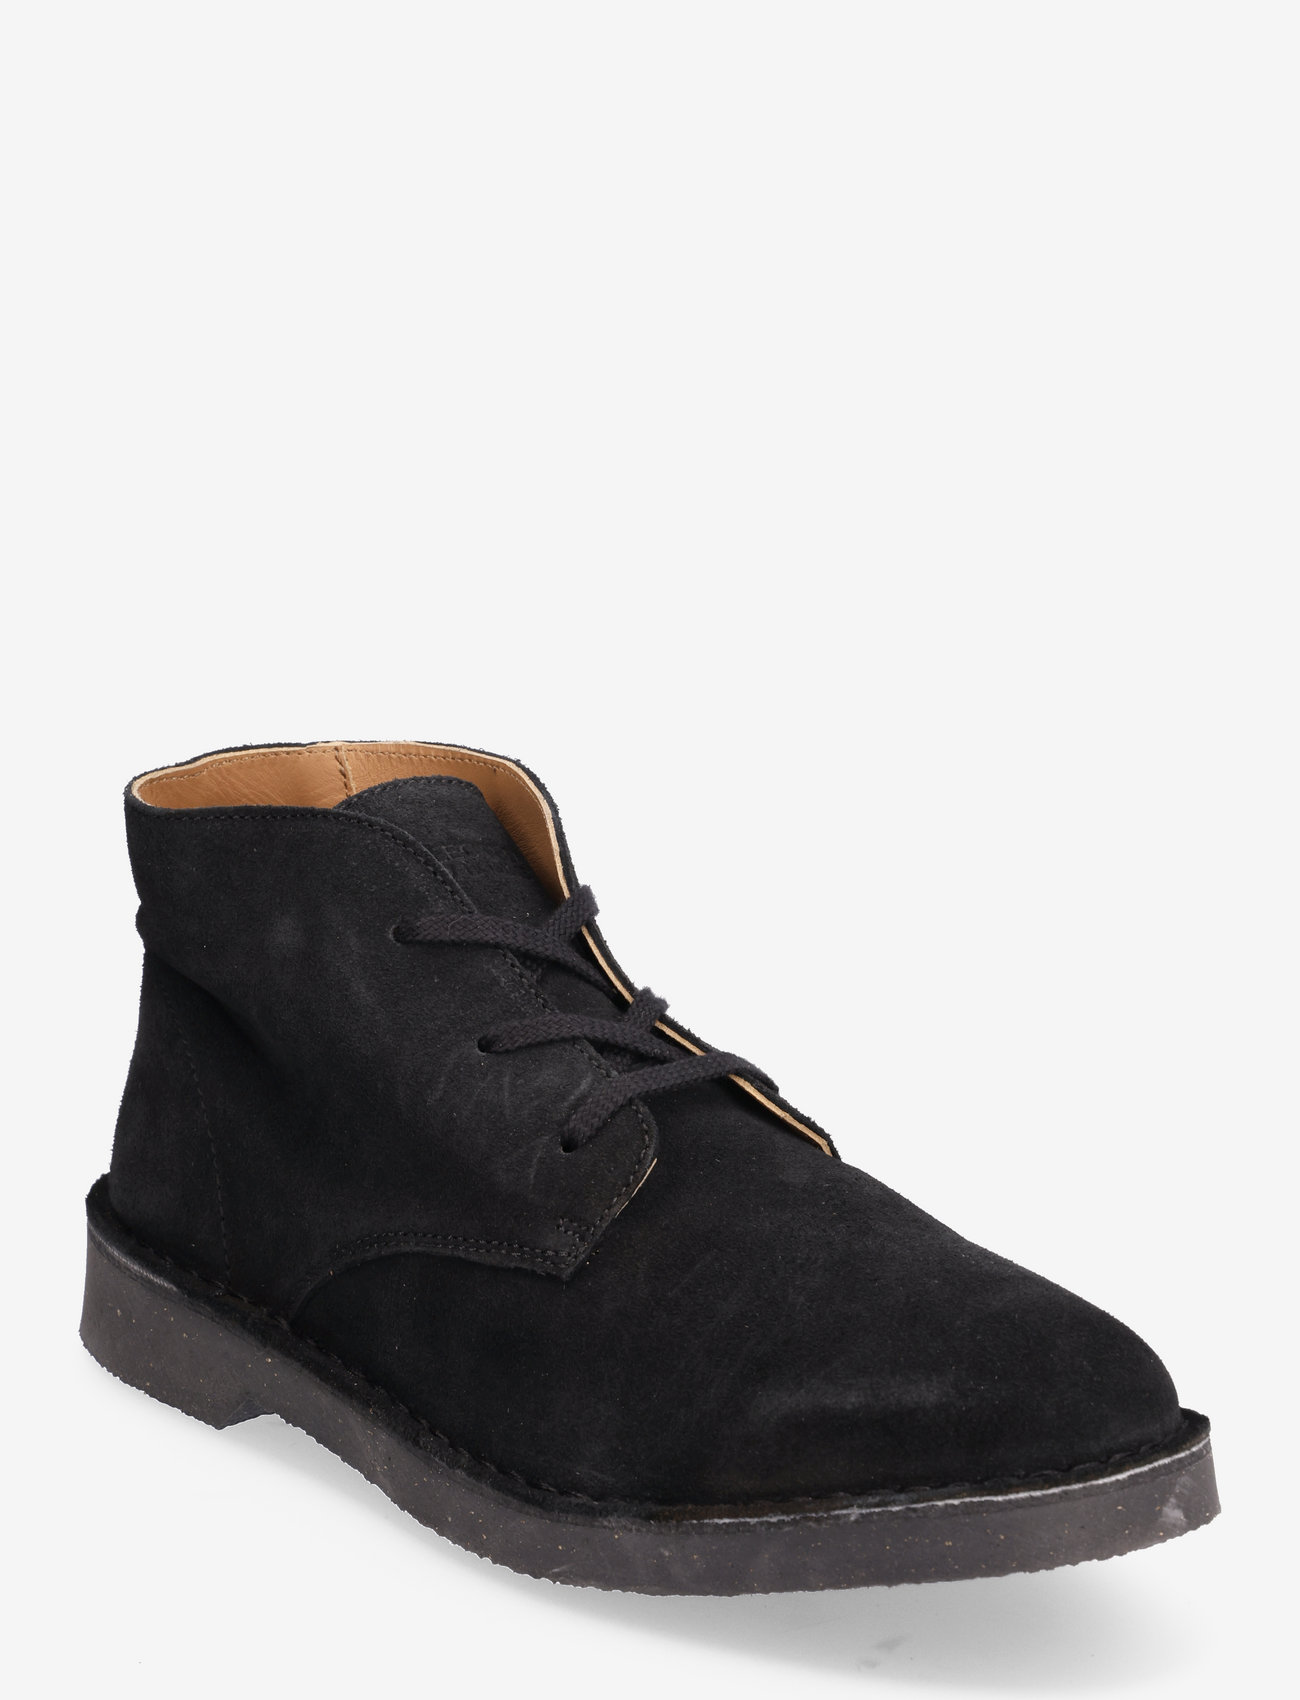 Selected Homme - SLHRIGA NEW SUEDE CHUKKA BOOT B - boots - black - 0